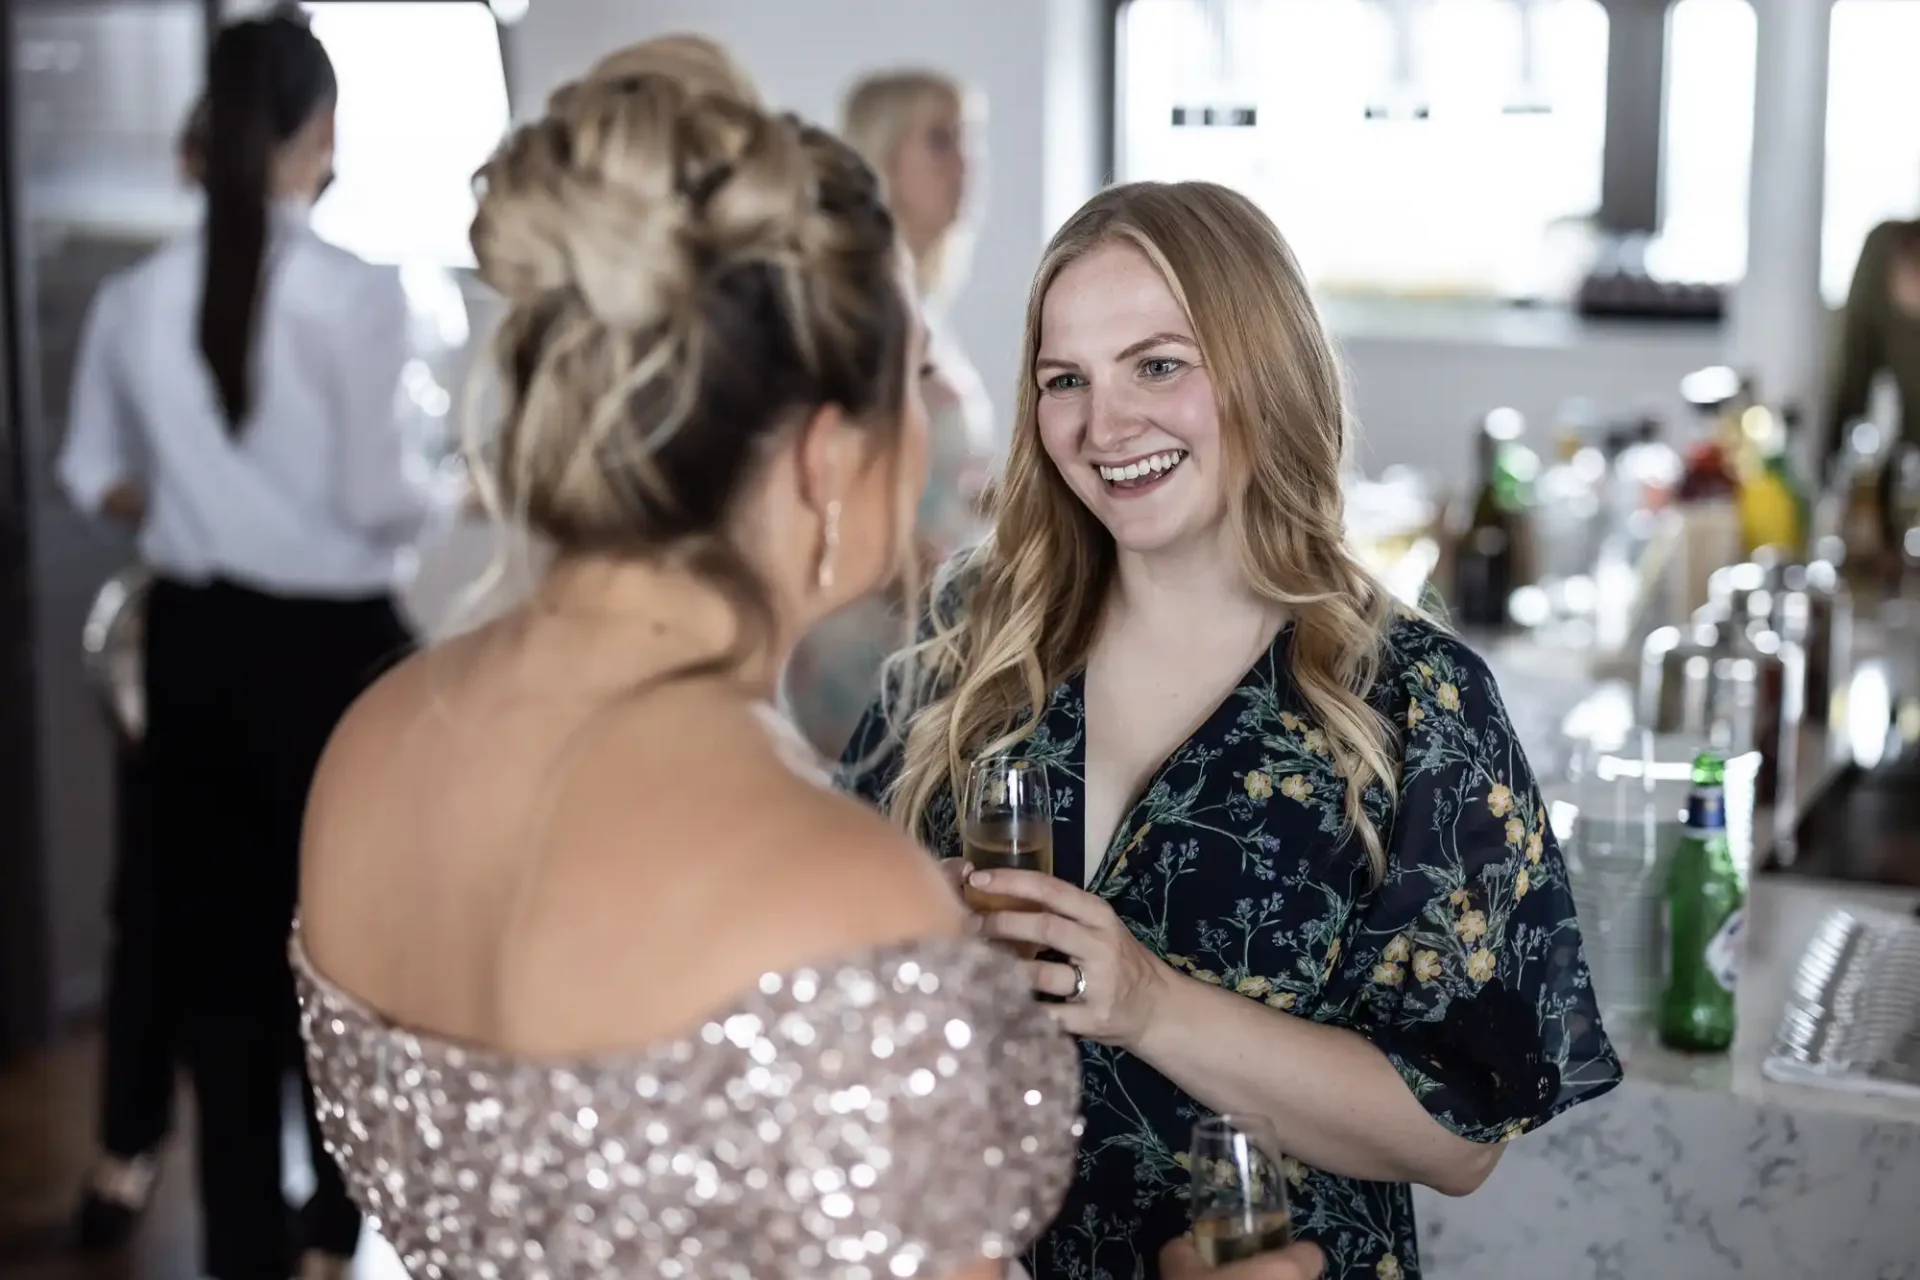 Two women, one in a floral dress and the other in a sequined top, conversing happily with drinks in hand at a social event.